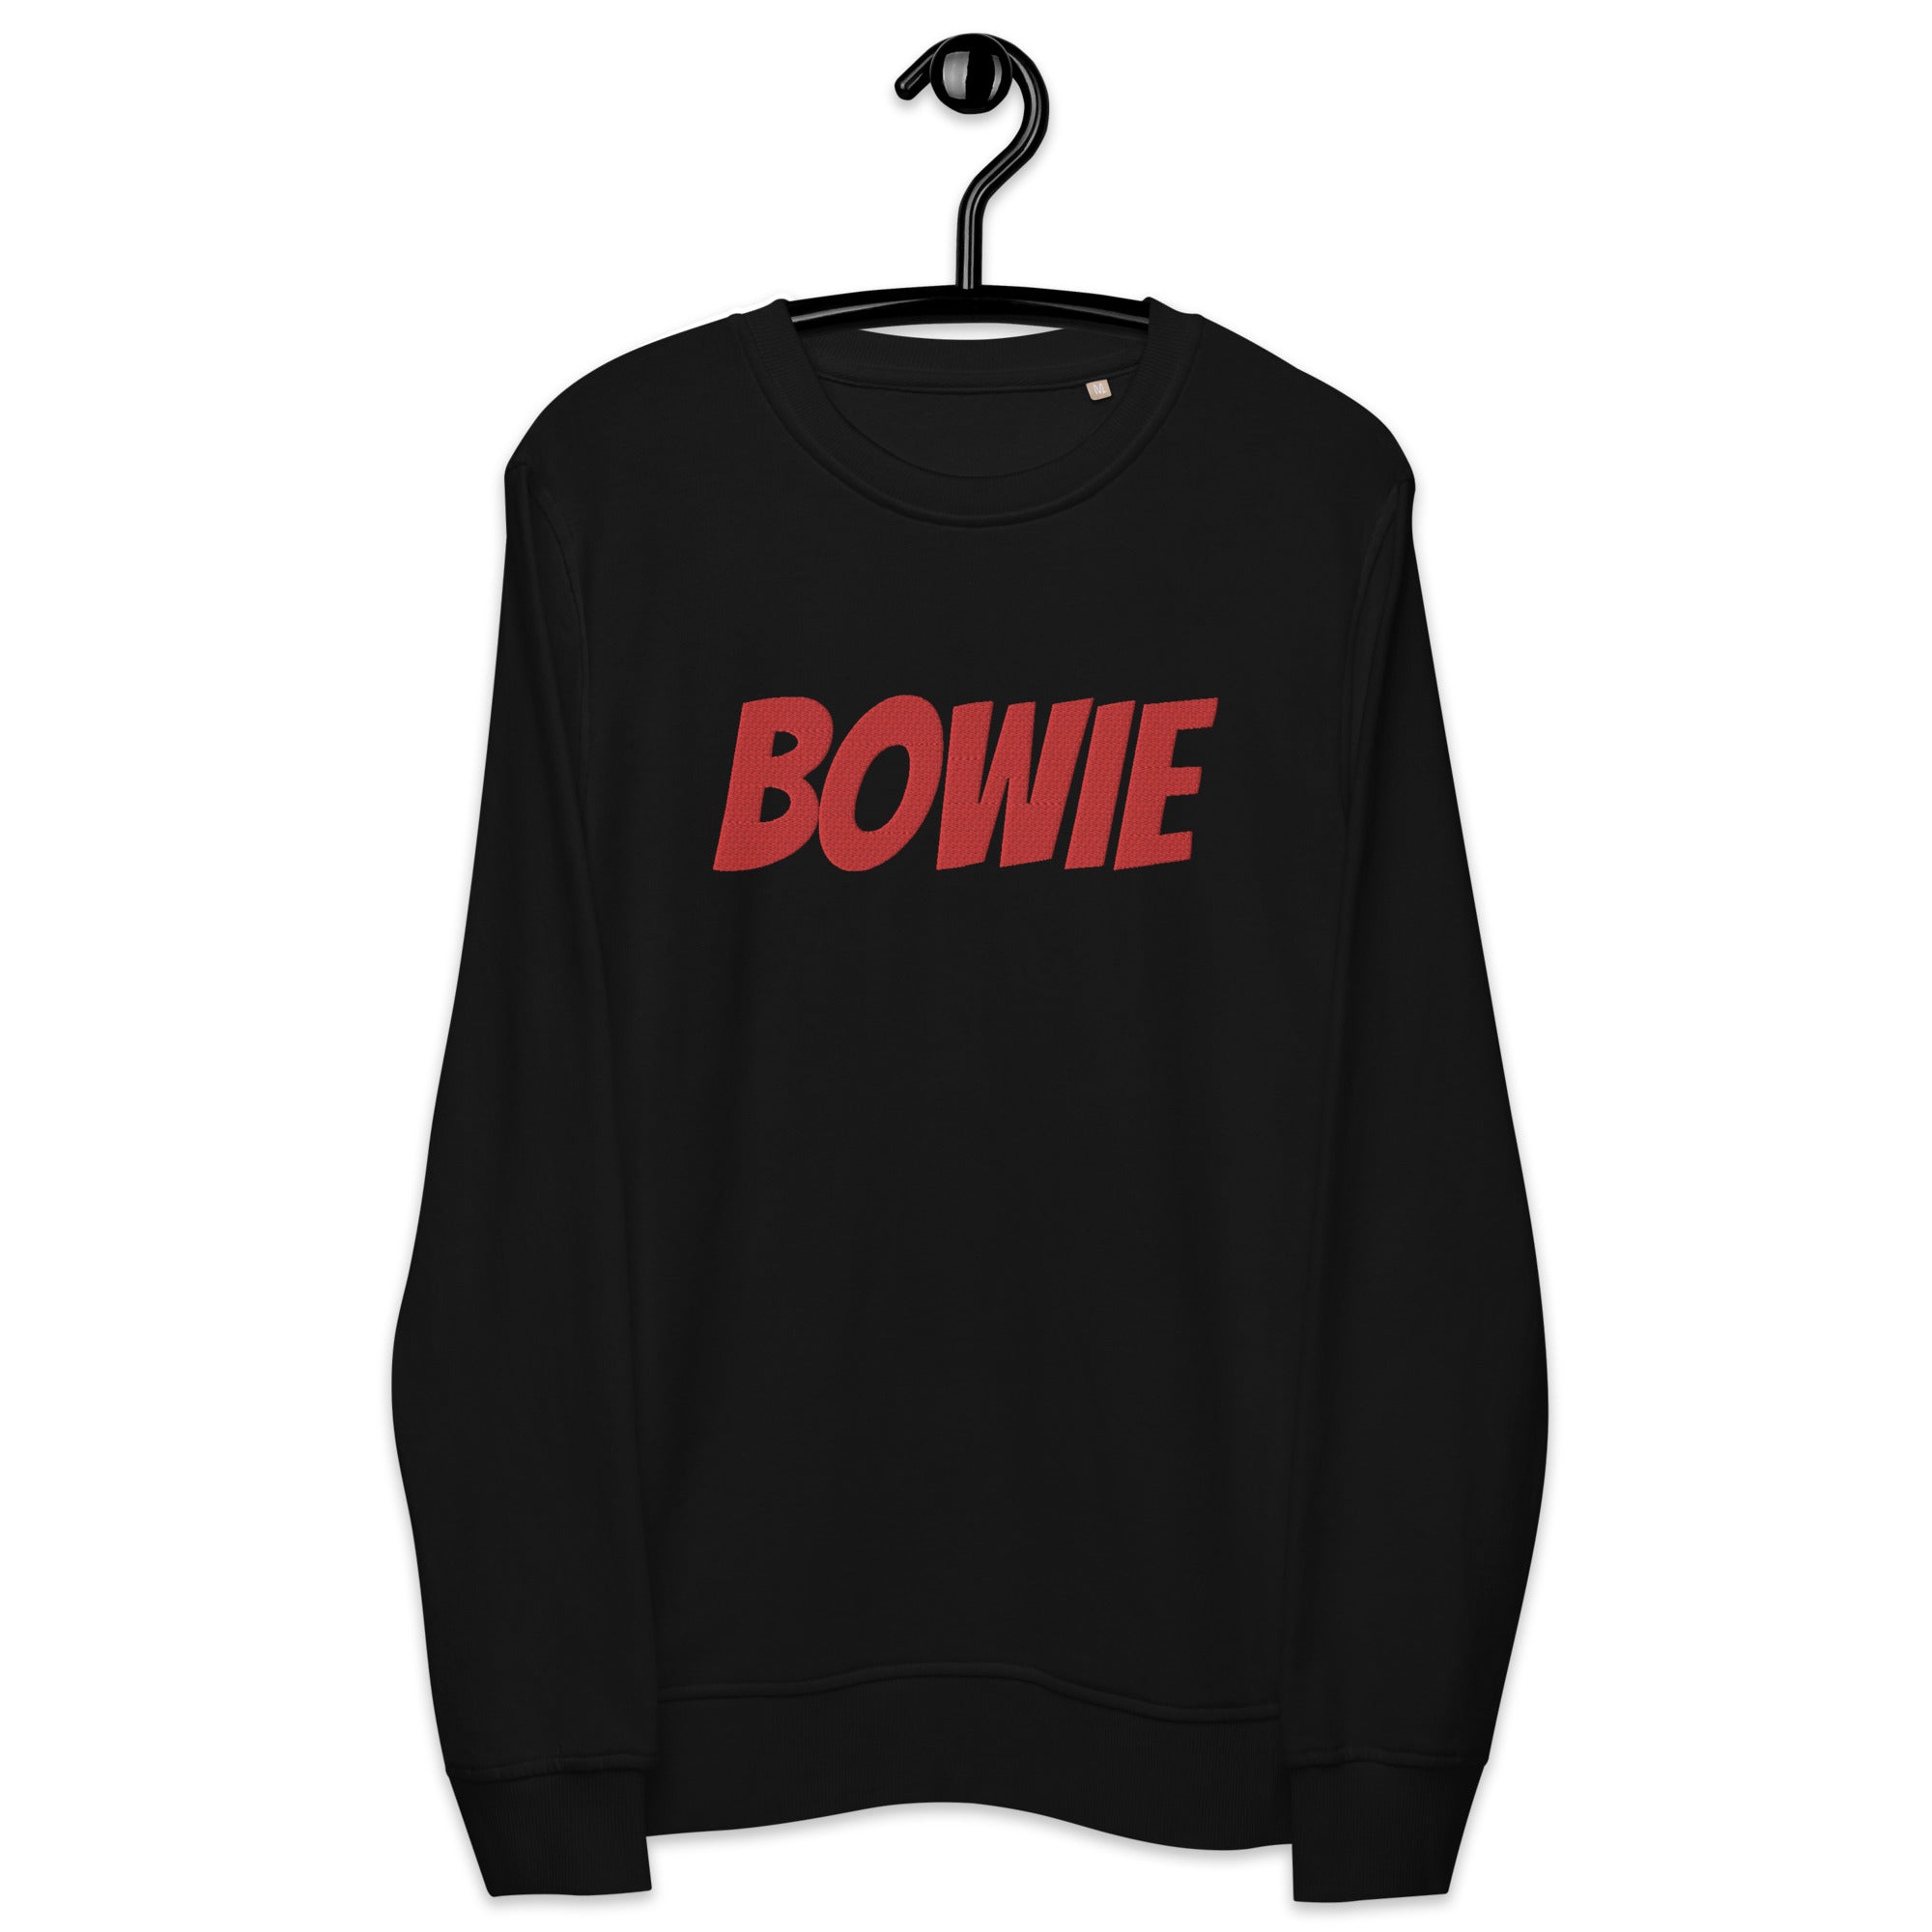 BOWIE Embroidered Unisex organic unisex sweatshirt - Red Embroidery (inspired by David Bowie)